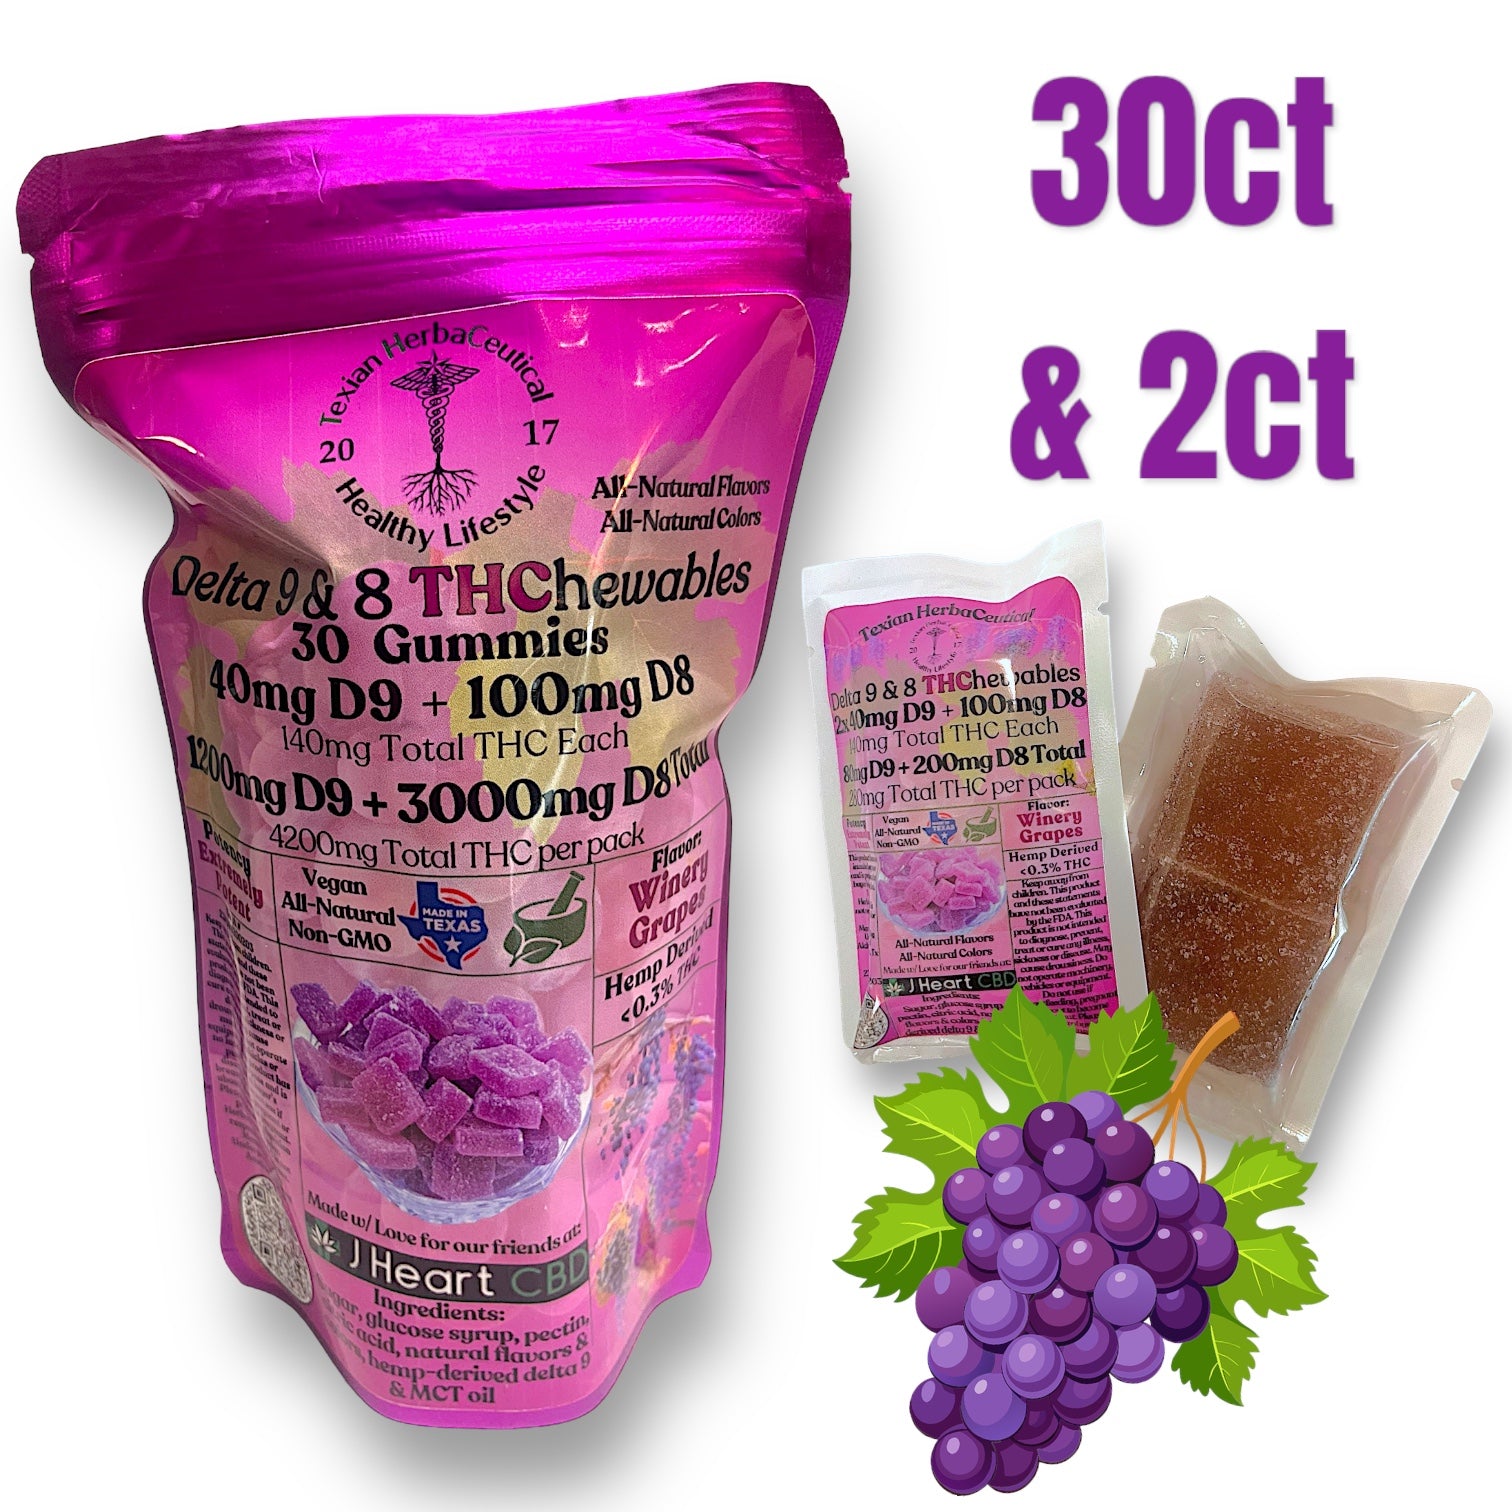 Texian Herbaceutical 40mg Delta 9 THC ( + 100mg Delta 8 THC) Winery Grapes Gummies - 2ct & 30ct HIGH POTENCY